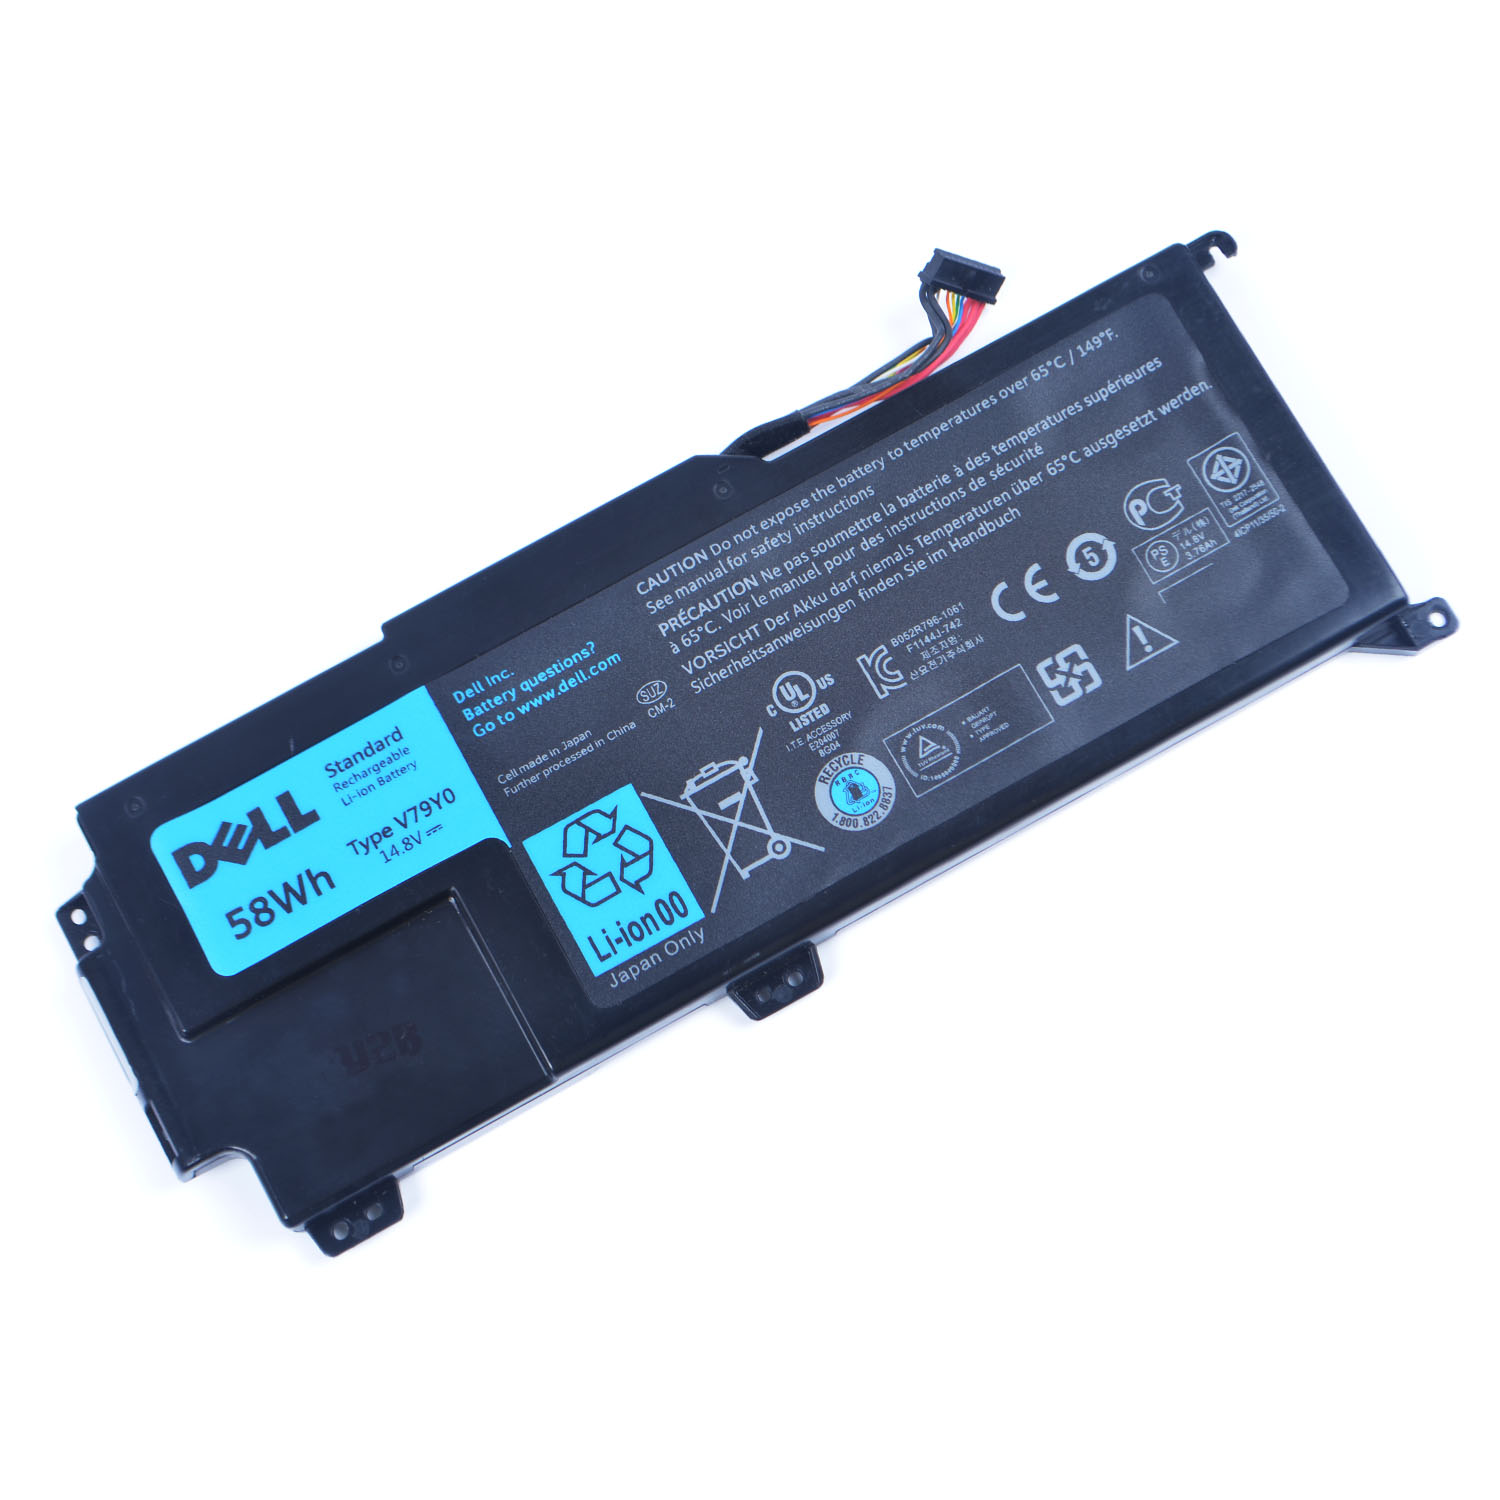 Dell Xps 14z L412x Battery Buy Best Dell Xps 14z L412x Laptop Battery Pack For Dell Laptop